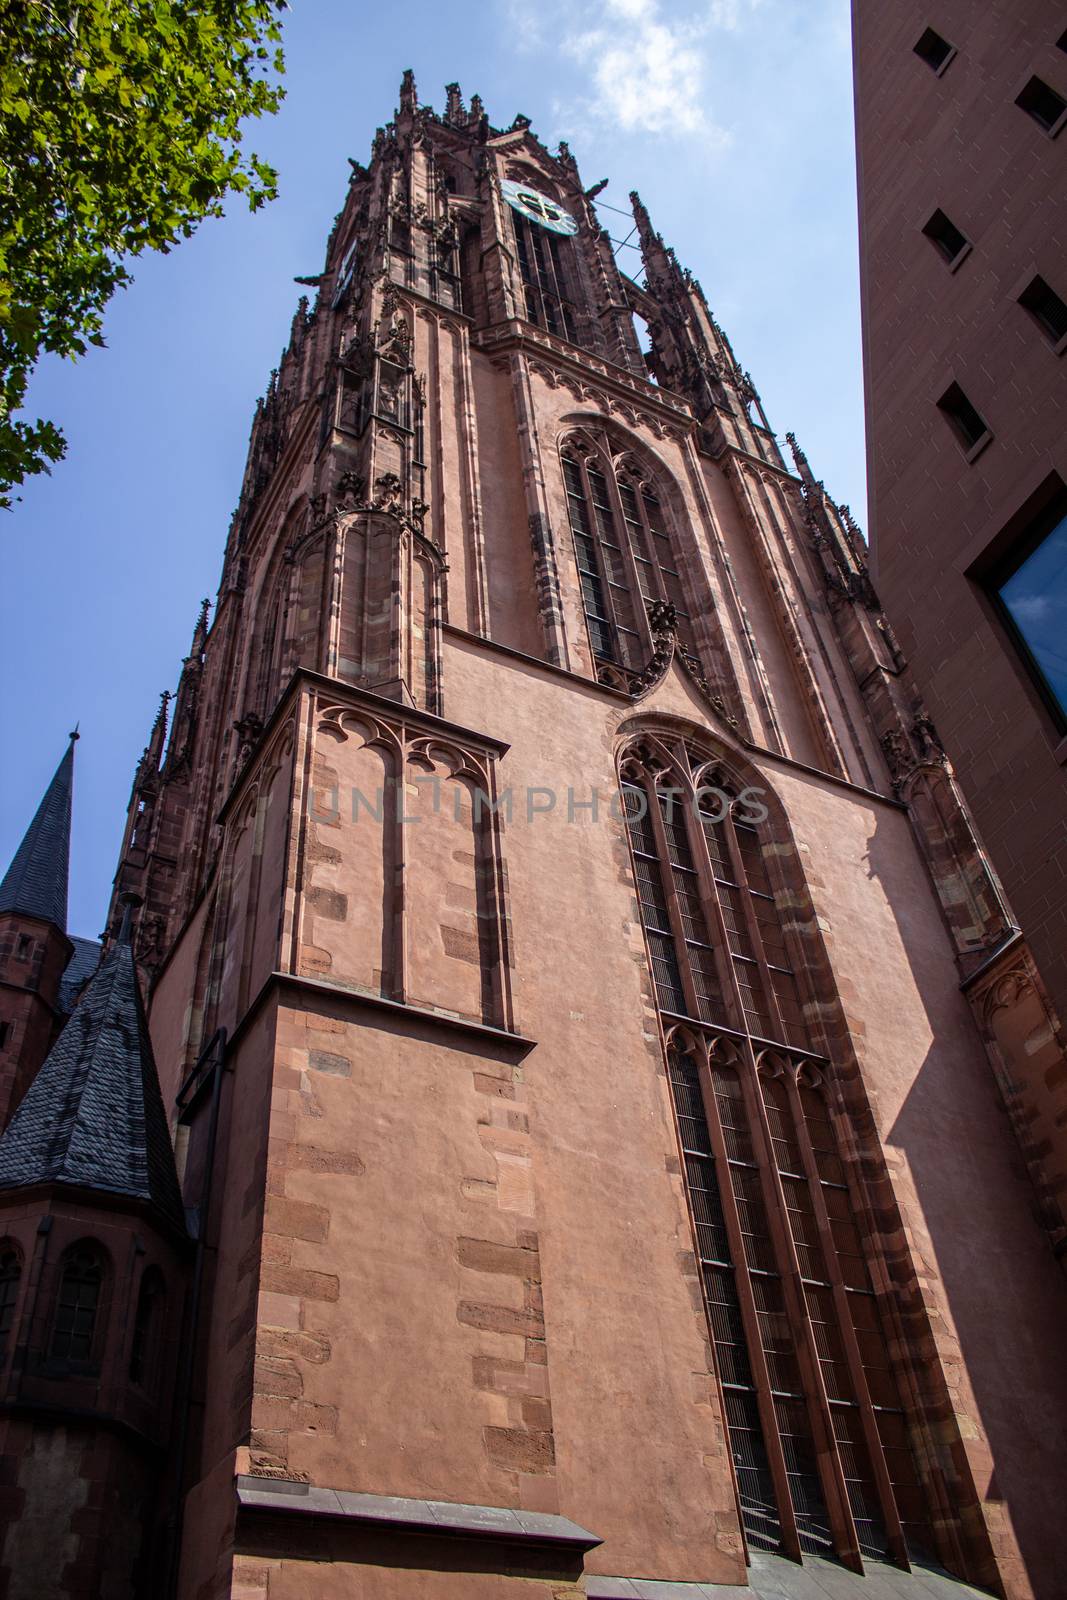 Street view of Frankfurt. Frankfurt am Main is the largest city in the German state of Hesse and the fifth-largest city in Germany. 2019